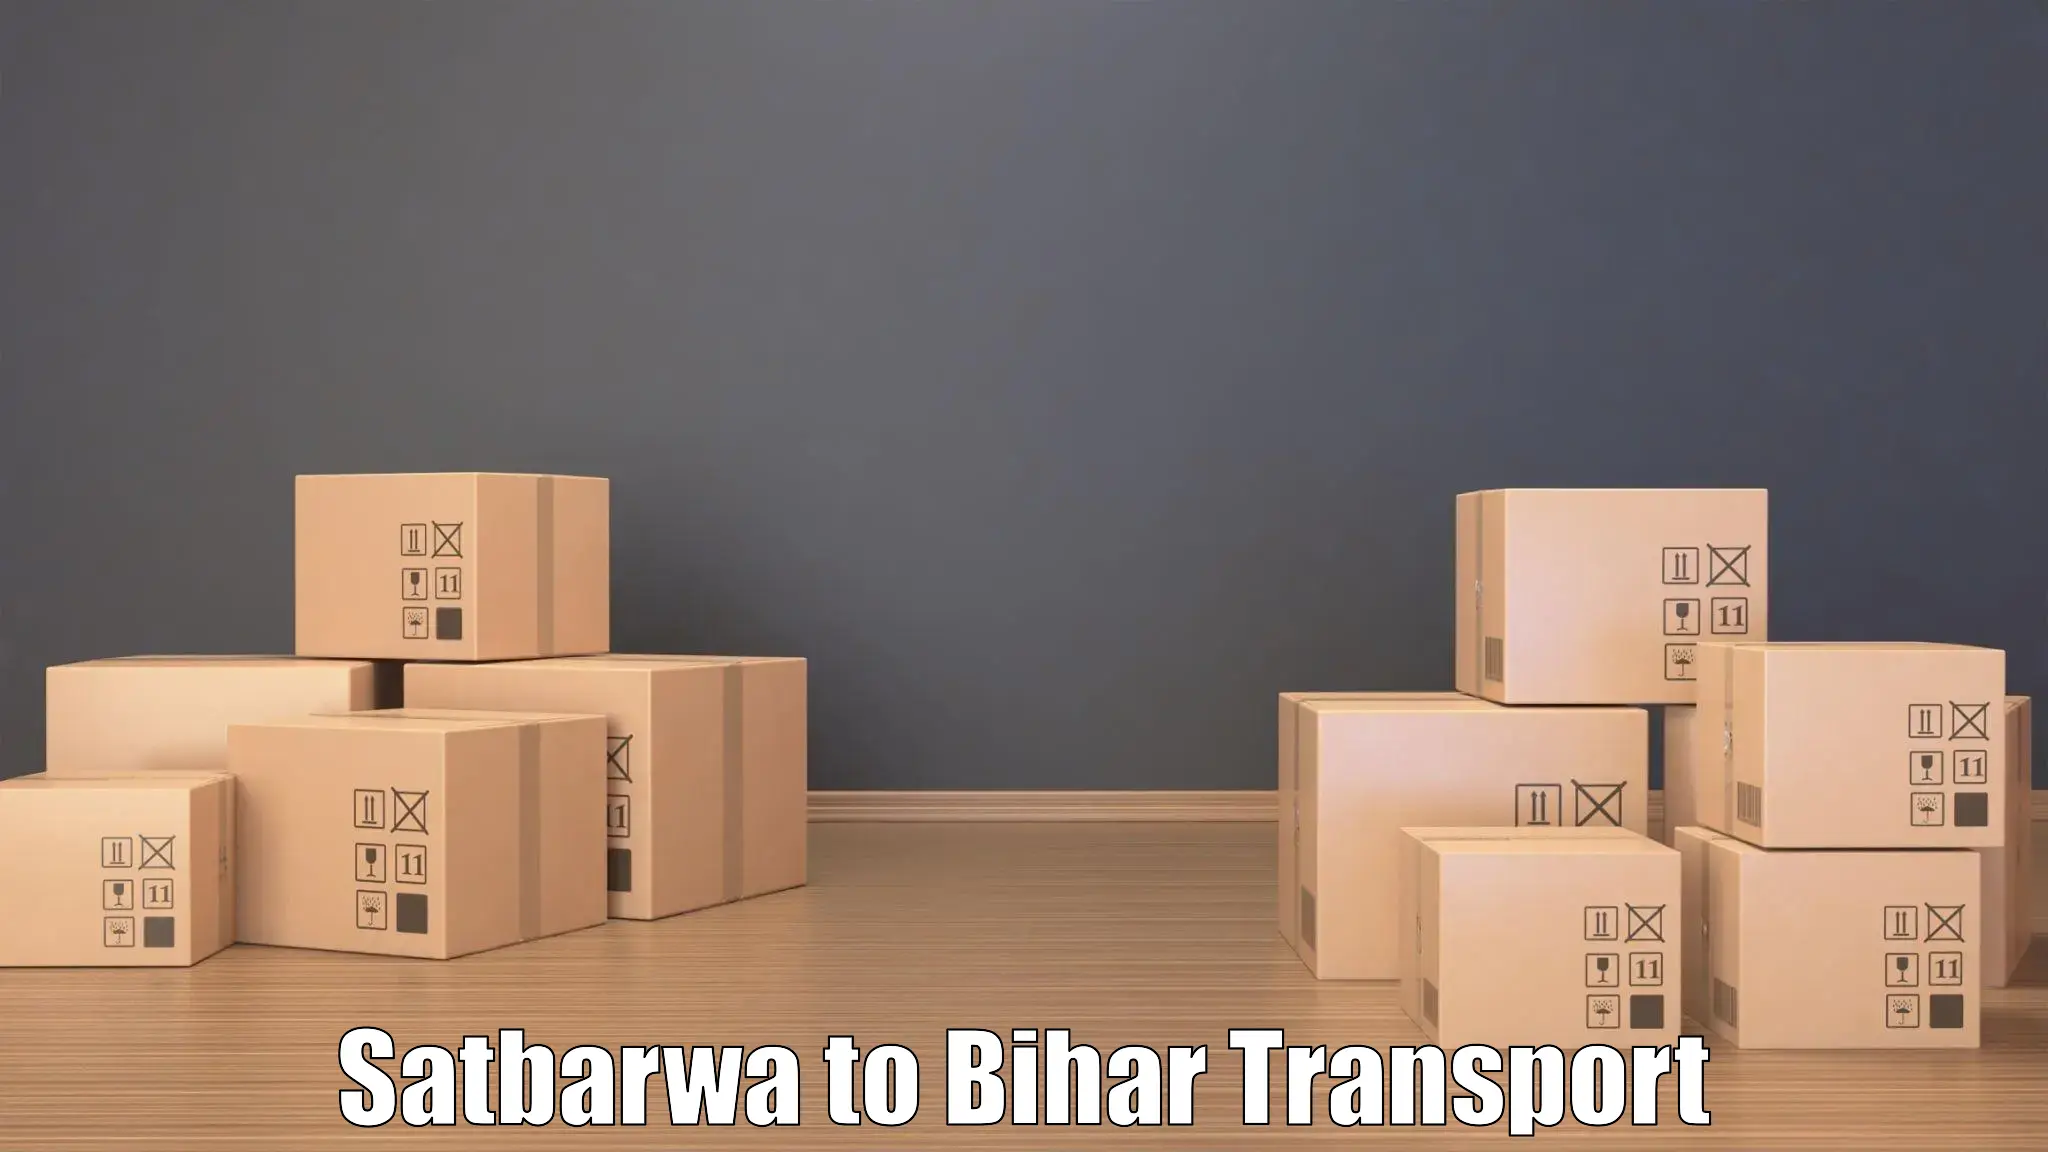 Air freight transport services in Satbarwa to Rusera